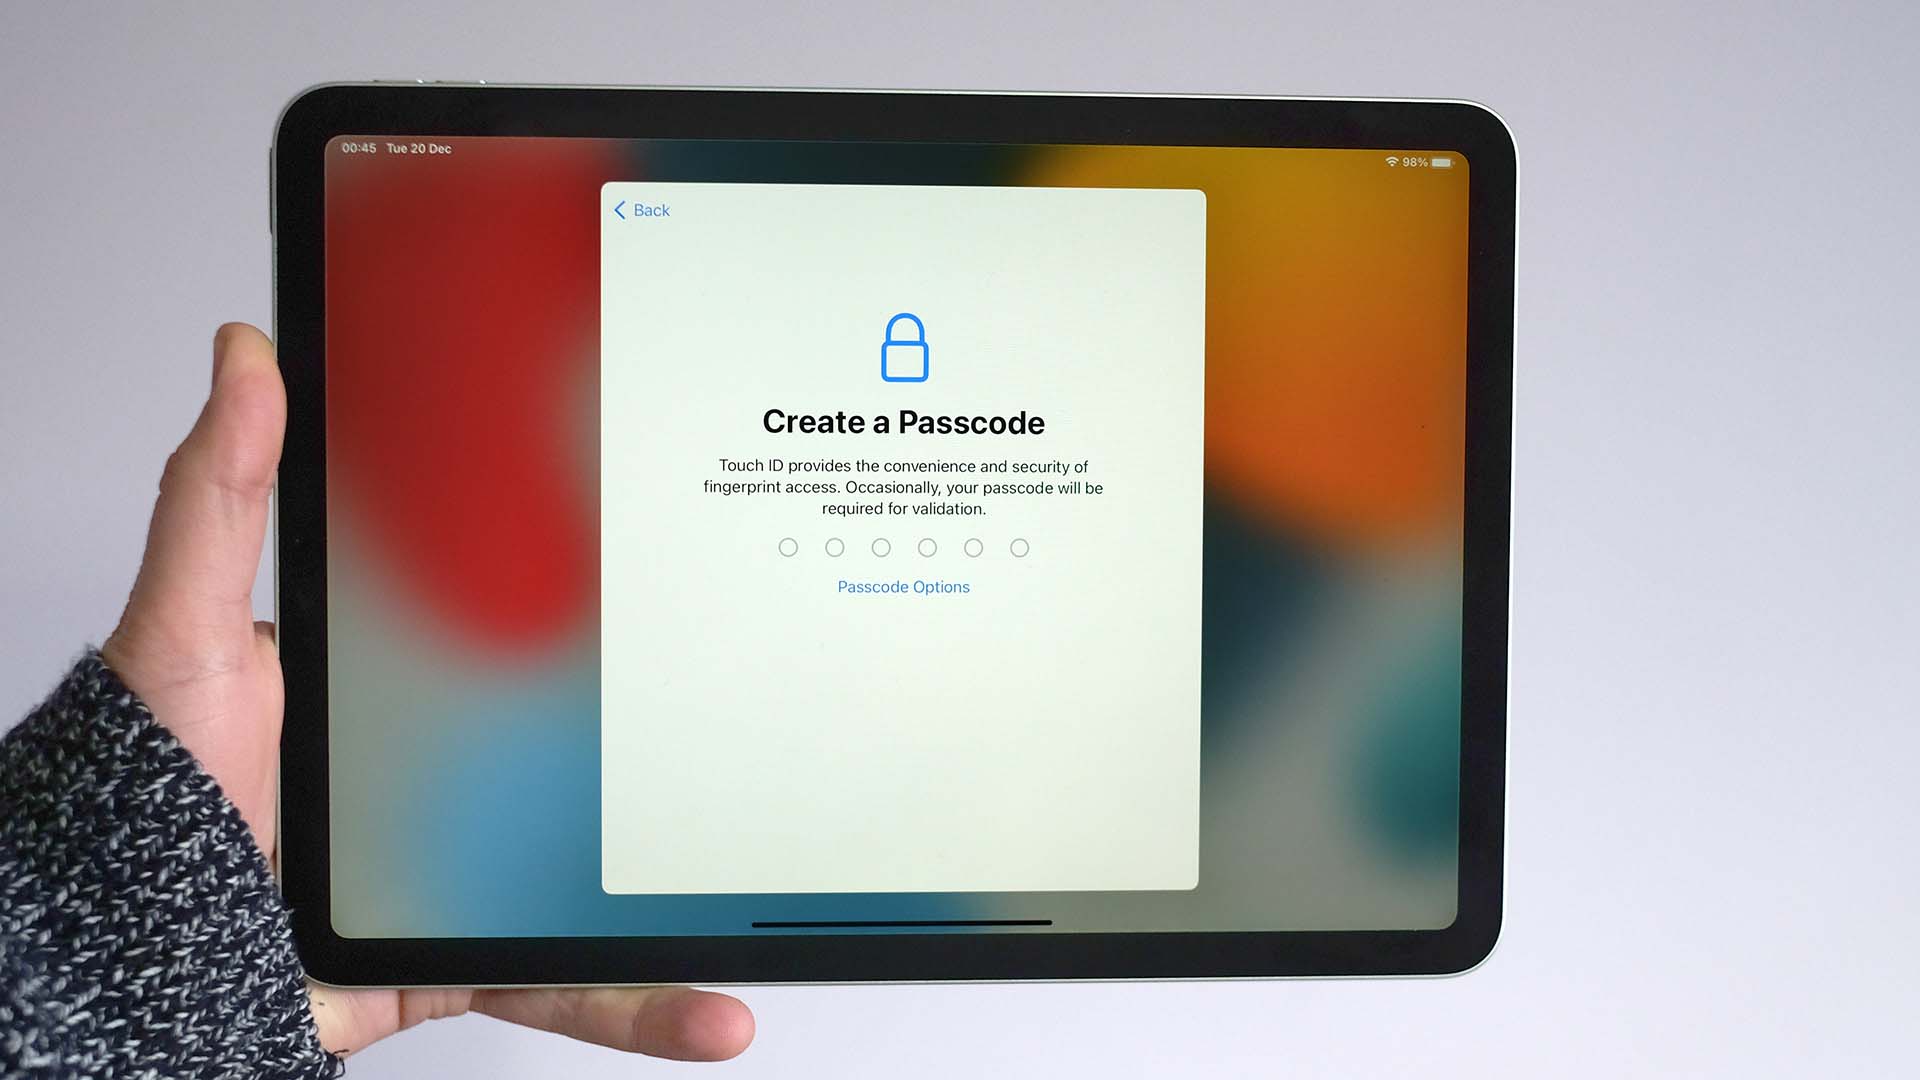 An iPad with the screen showing the options for creating a passcode